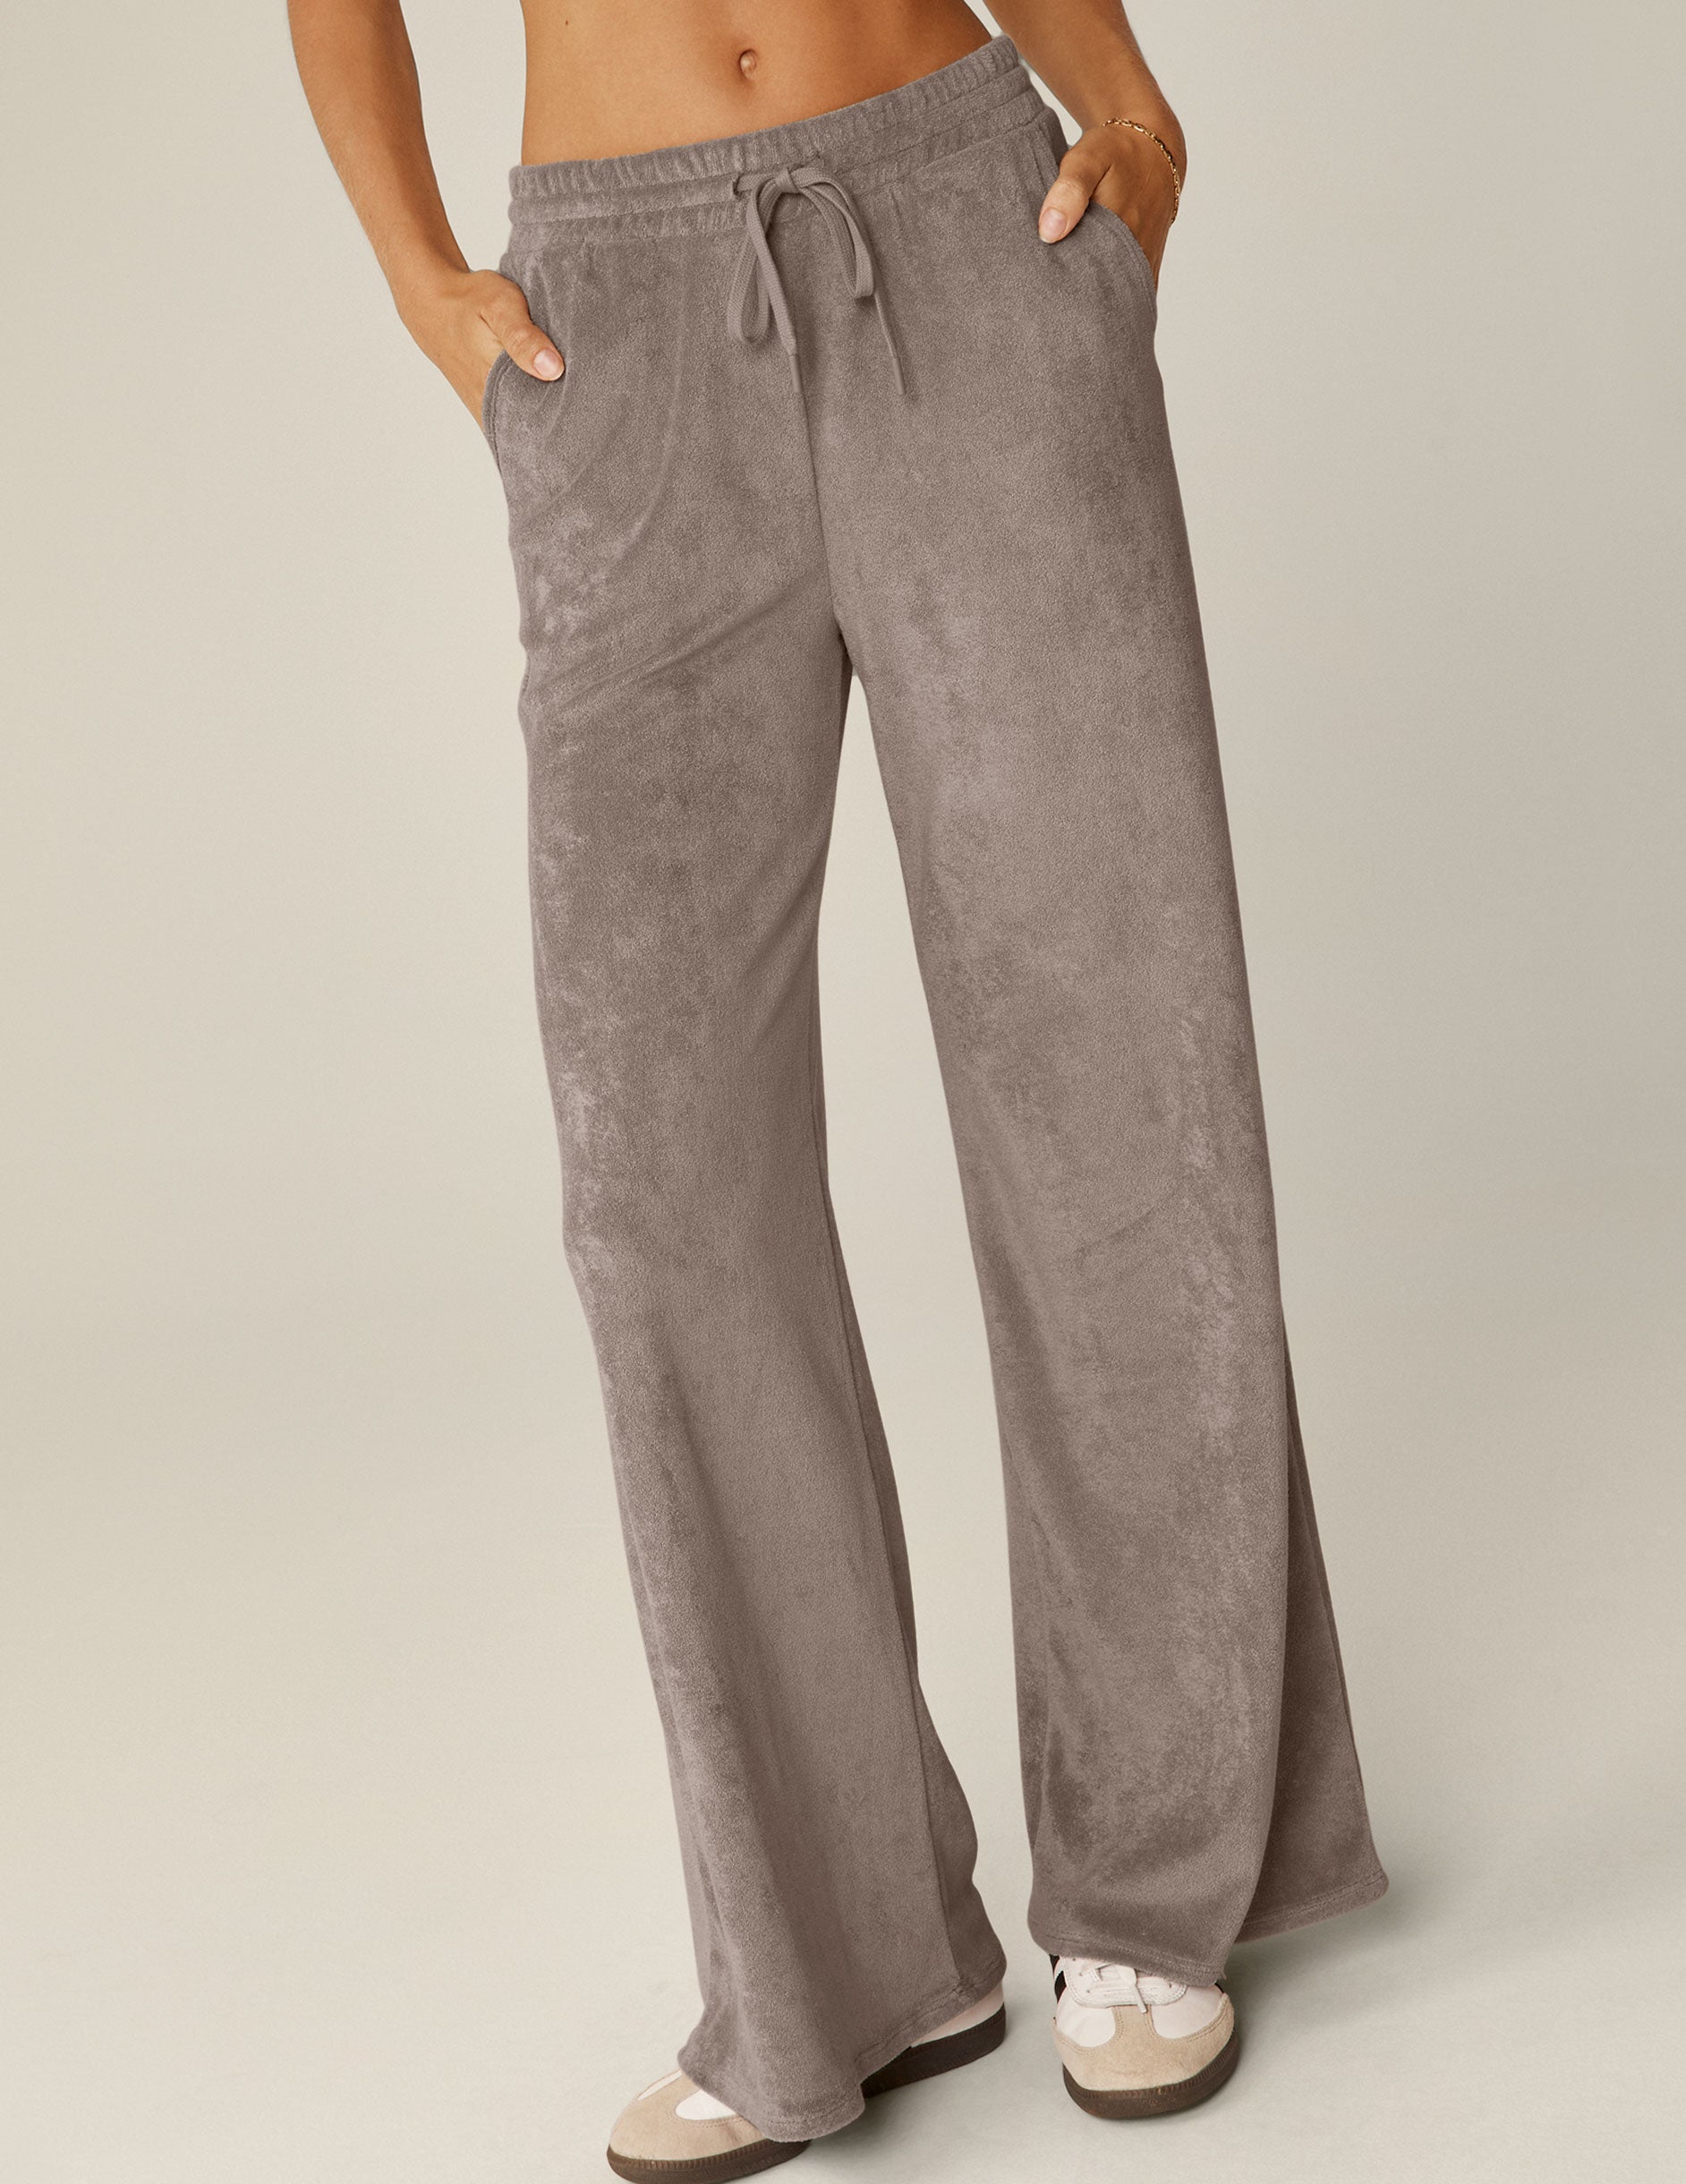 brown terry fabric wide leg pants with a drawstring at the waistband.